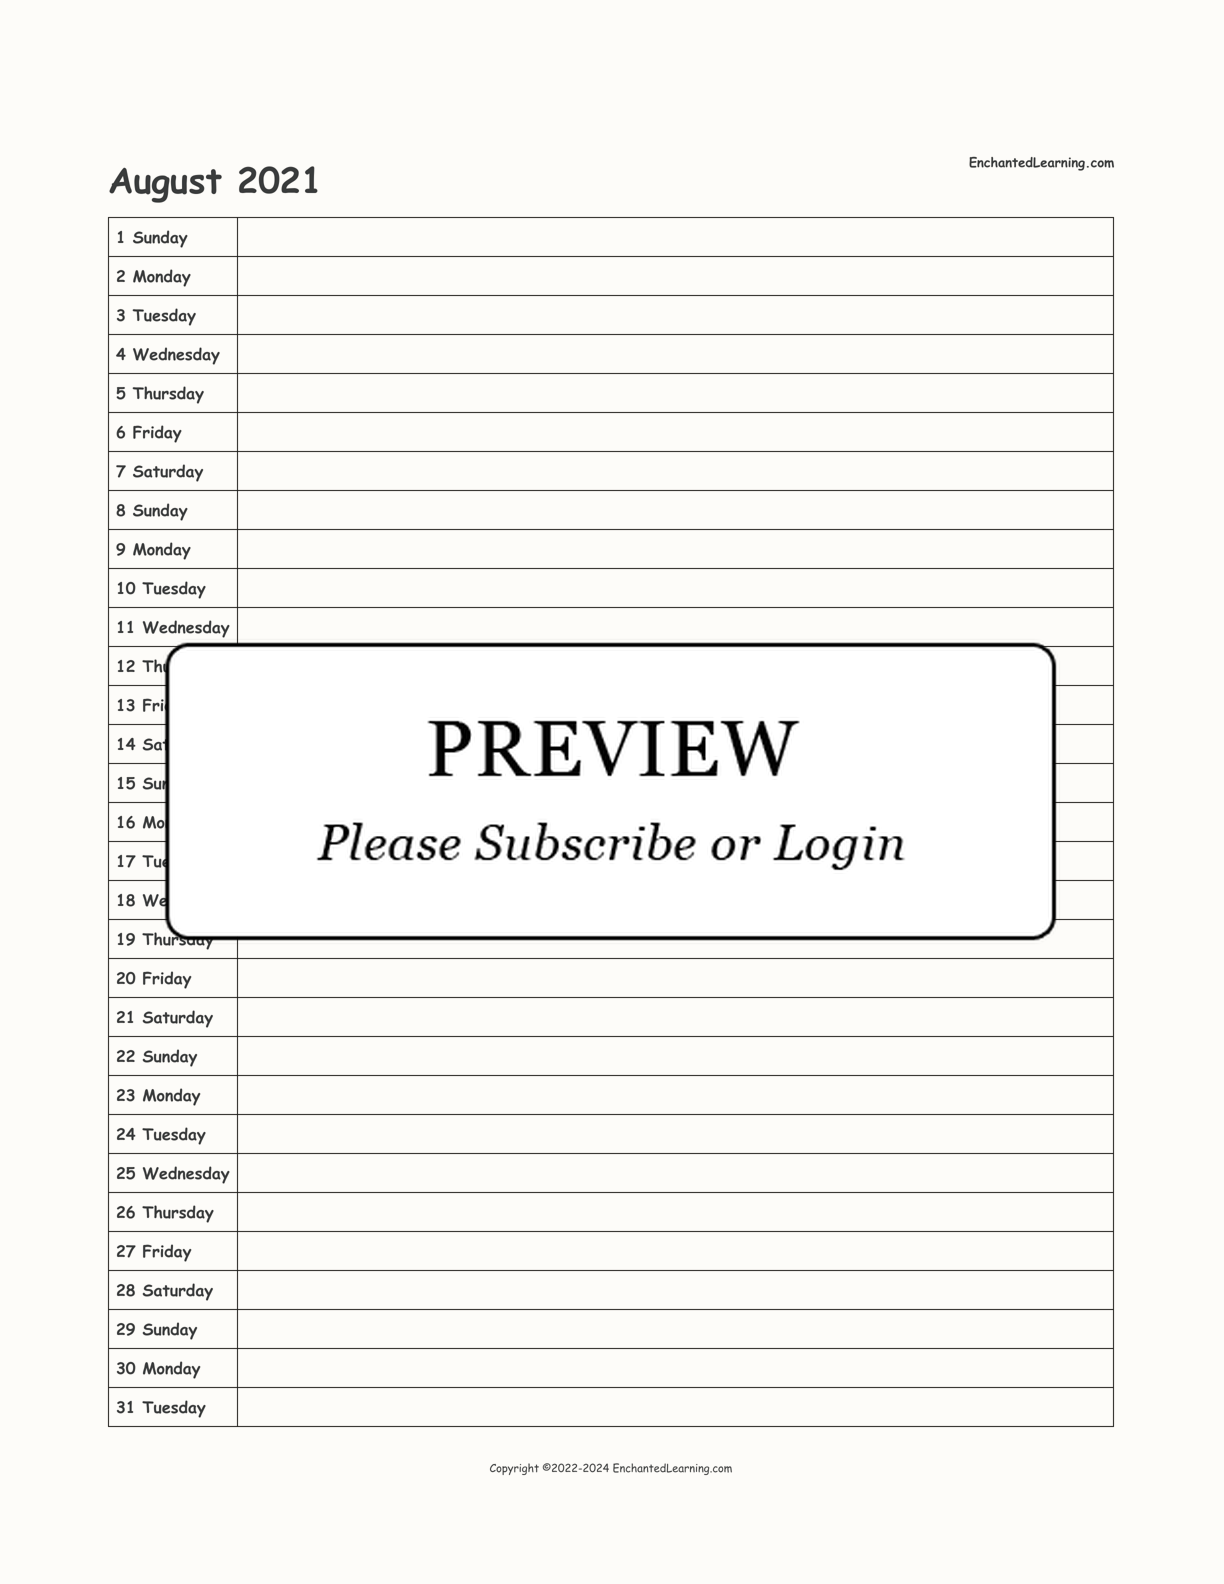 2021 Scheduling Calendar interactive printout page 8